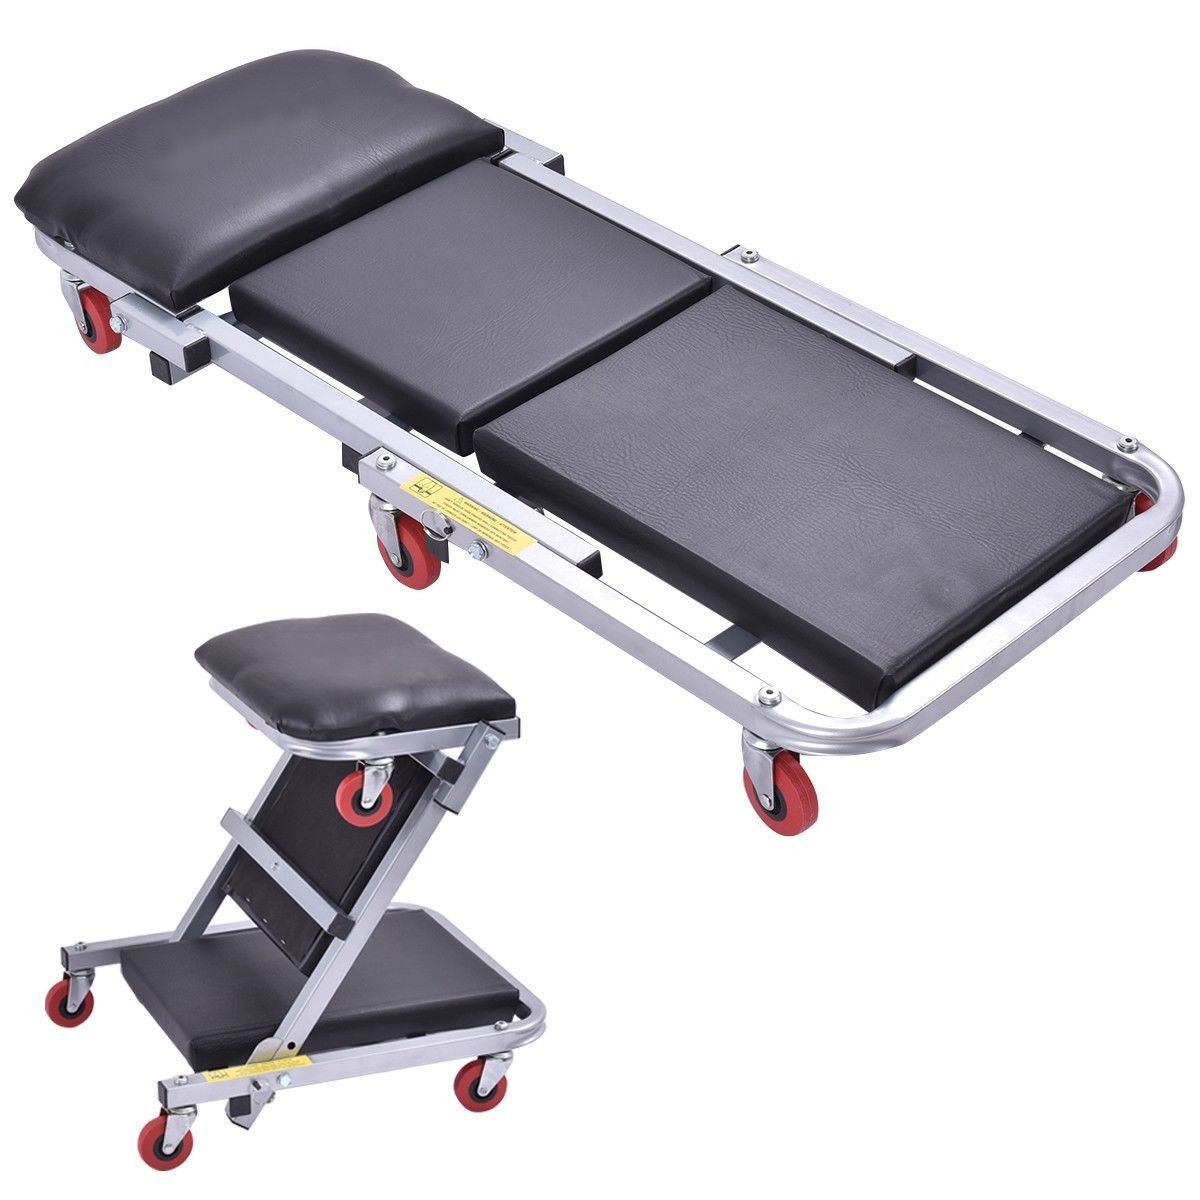 Picture of Online Gym Shop CB17046 6 x 18 x 40 in. 2 in 1 Foldable Mechanics Z Creeper Seat Rolling Chair Garage Work Stool - 40 in.